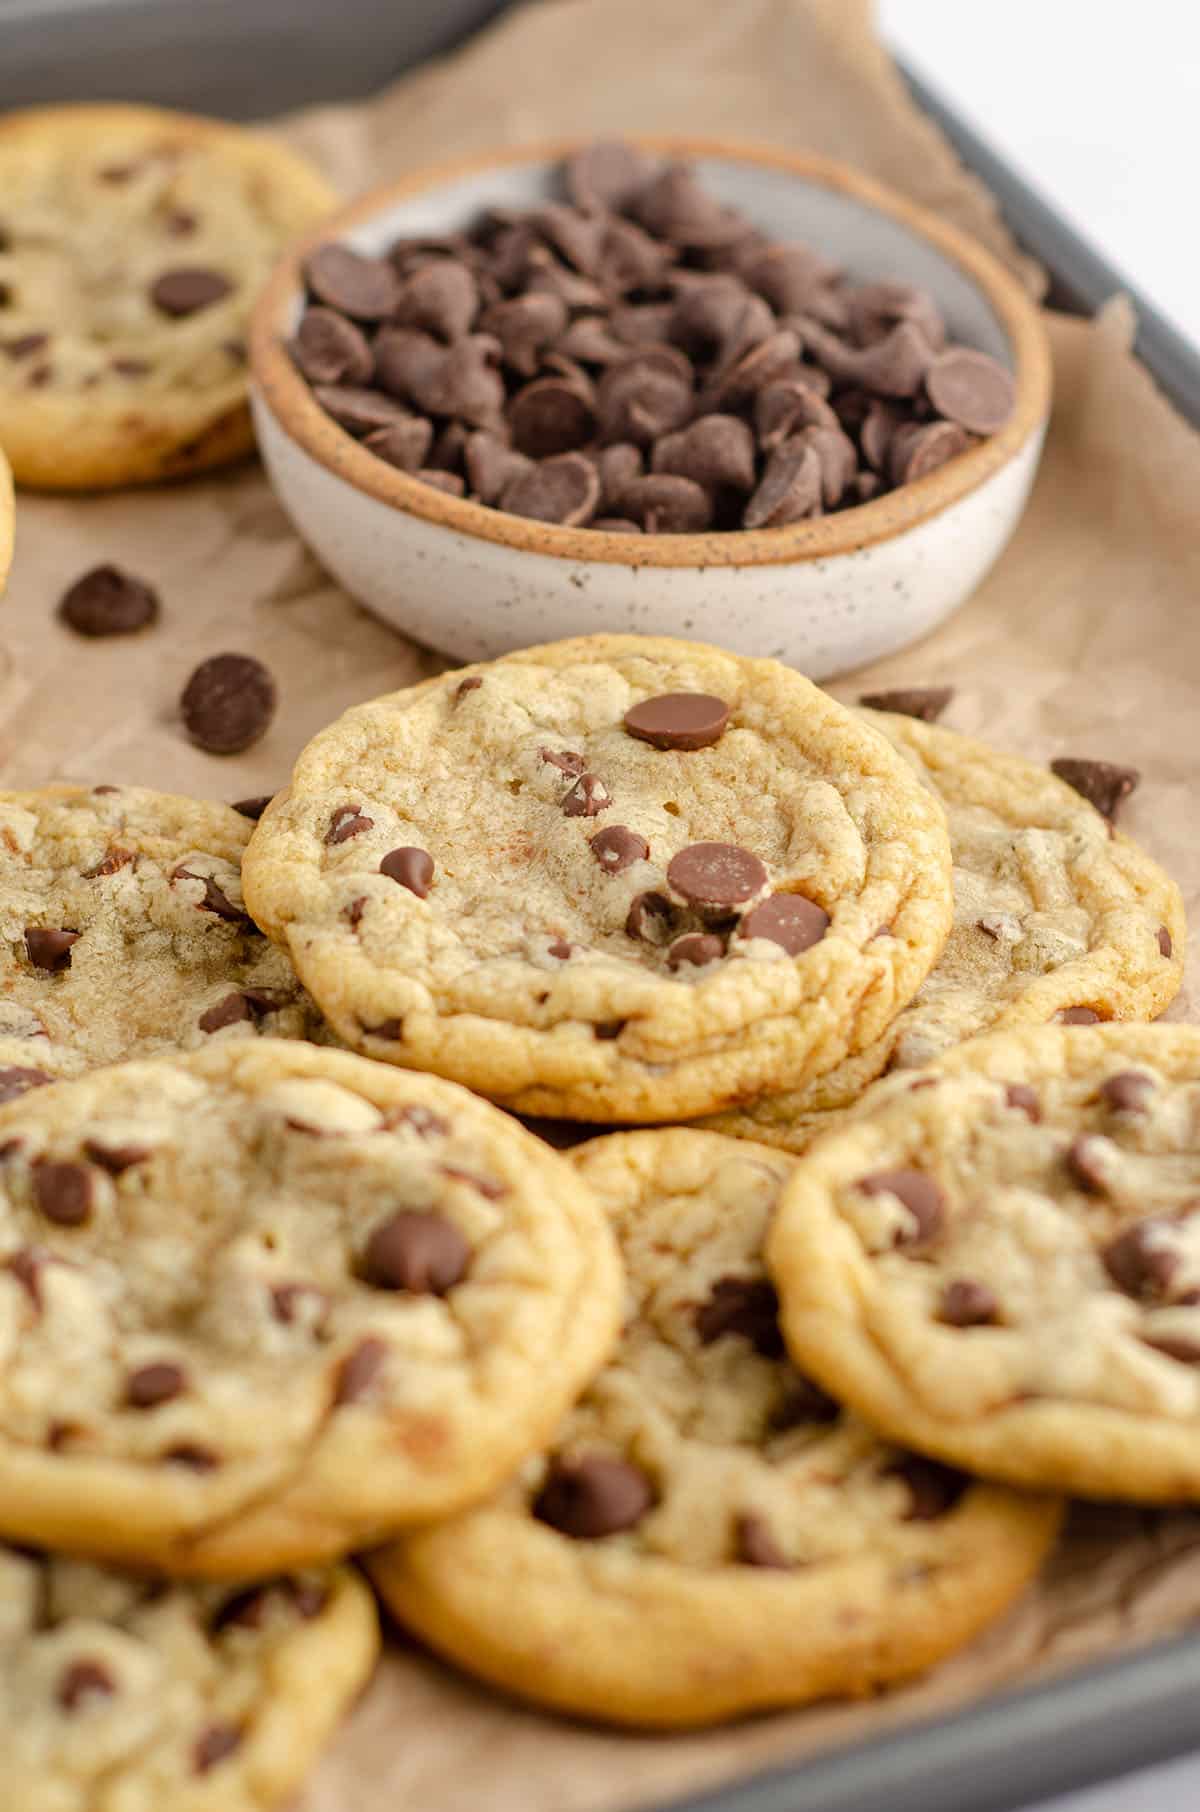 a pile of chocolate chip cookies on a baking sheet lined with parchment paper and a bowl of chocolate chips